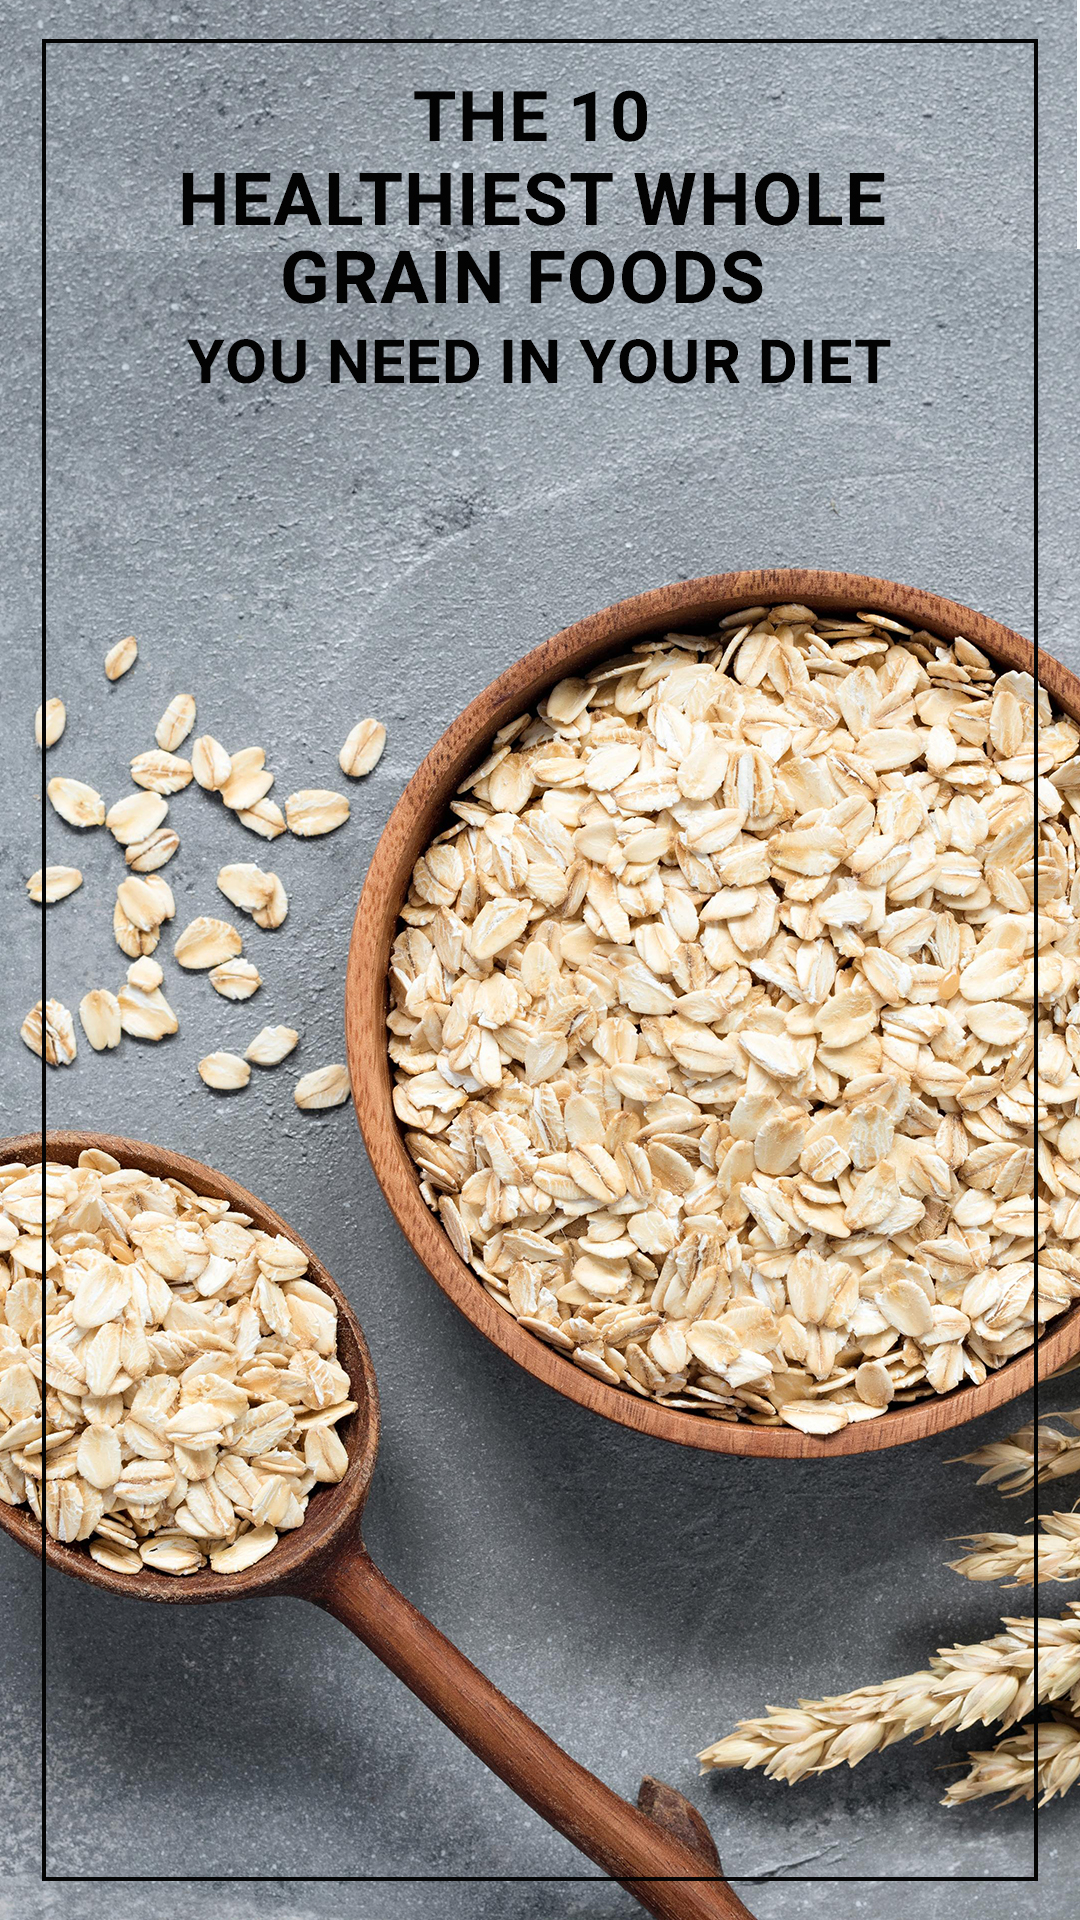 The 10 Healthiest Whole Grain Foods You Need In Your Diet